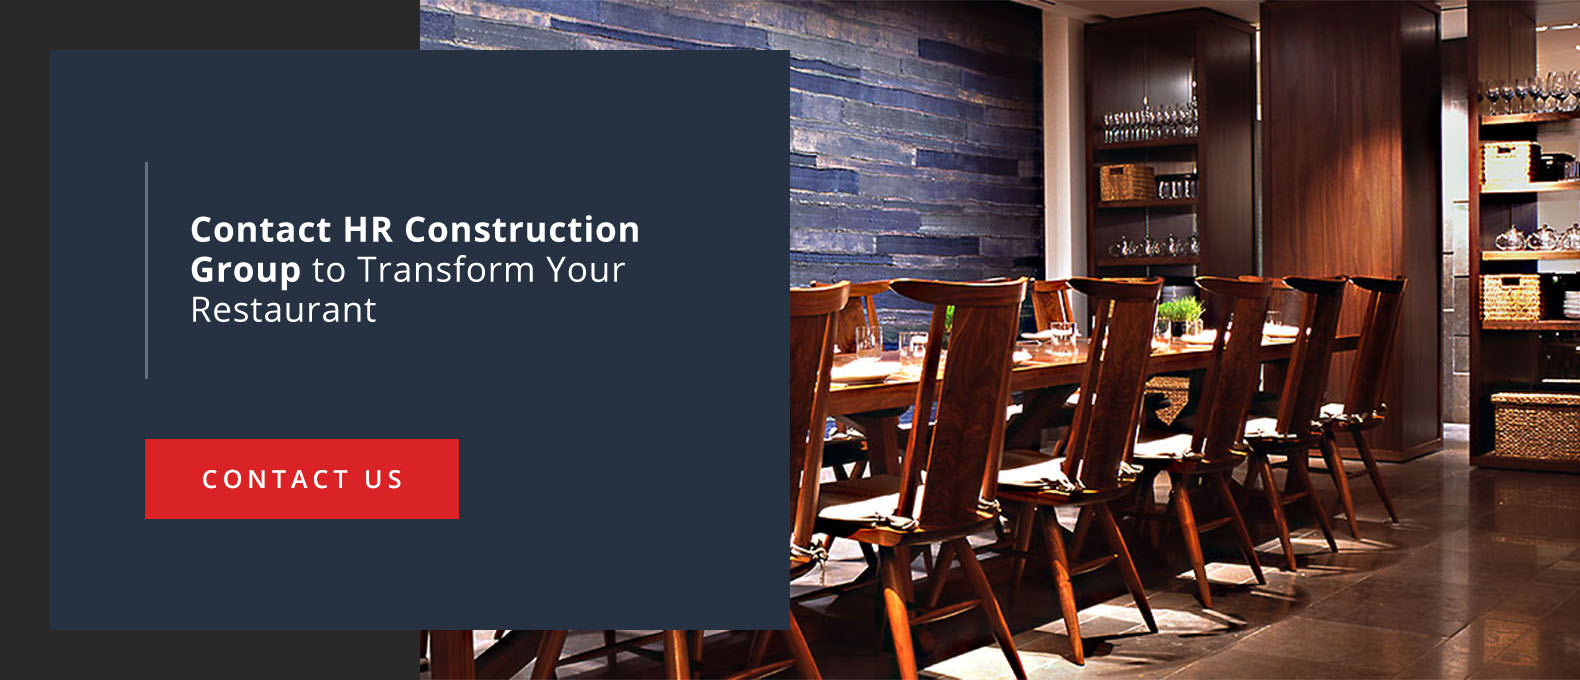 Contact HR Construction Group to Transform Your Restaurant - Blue Duck background